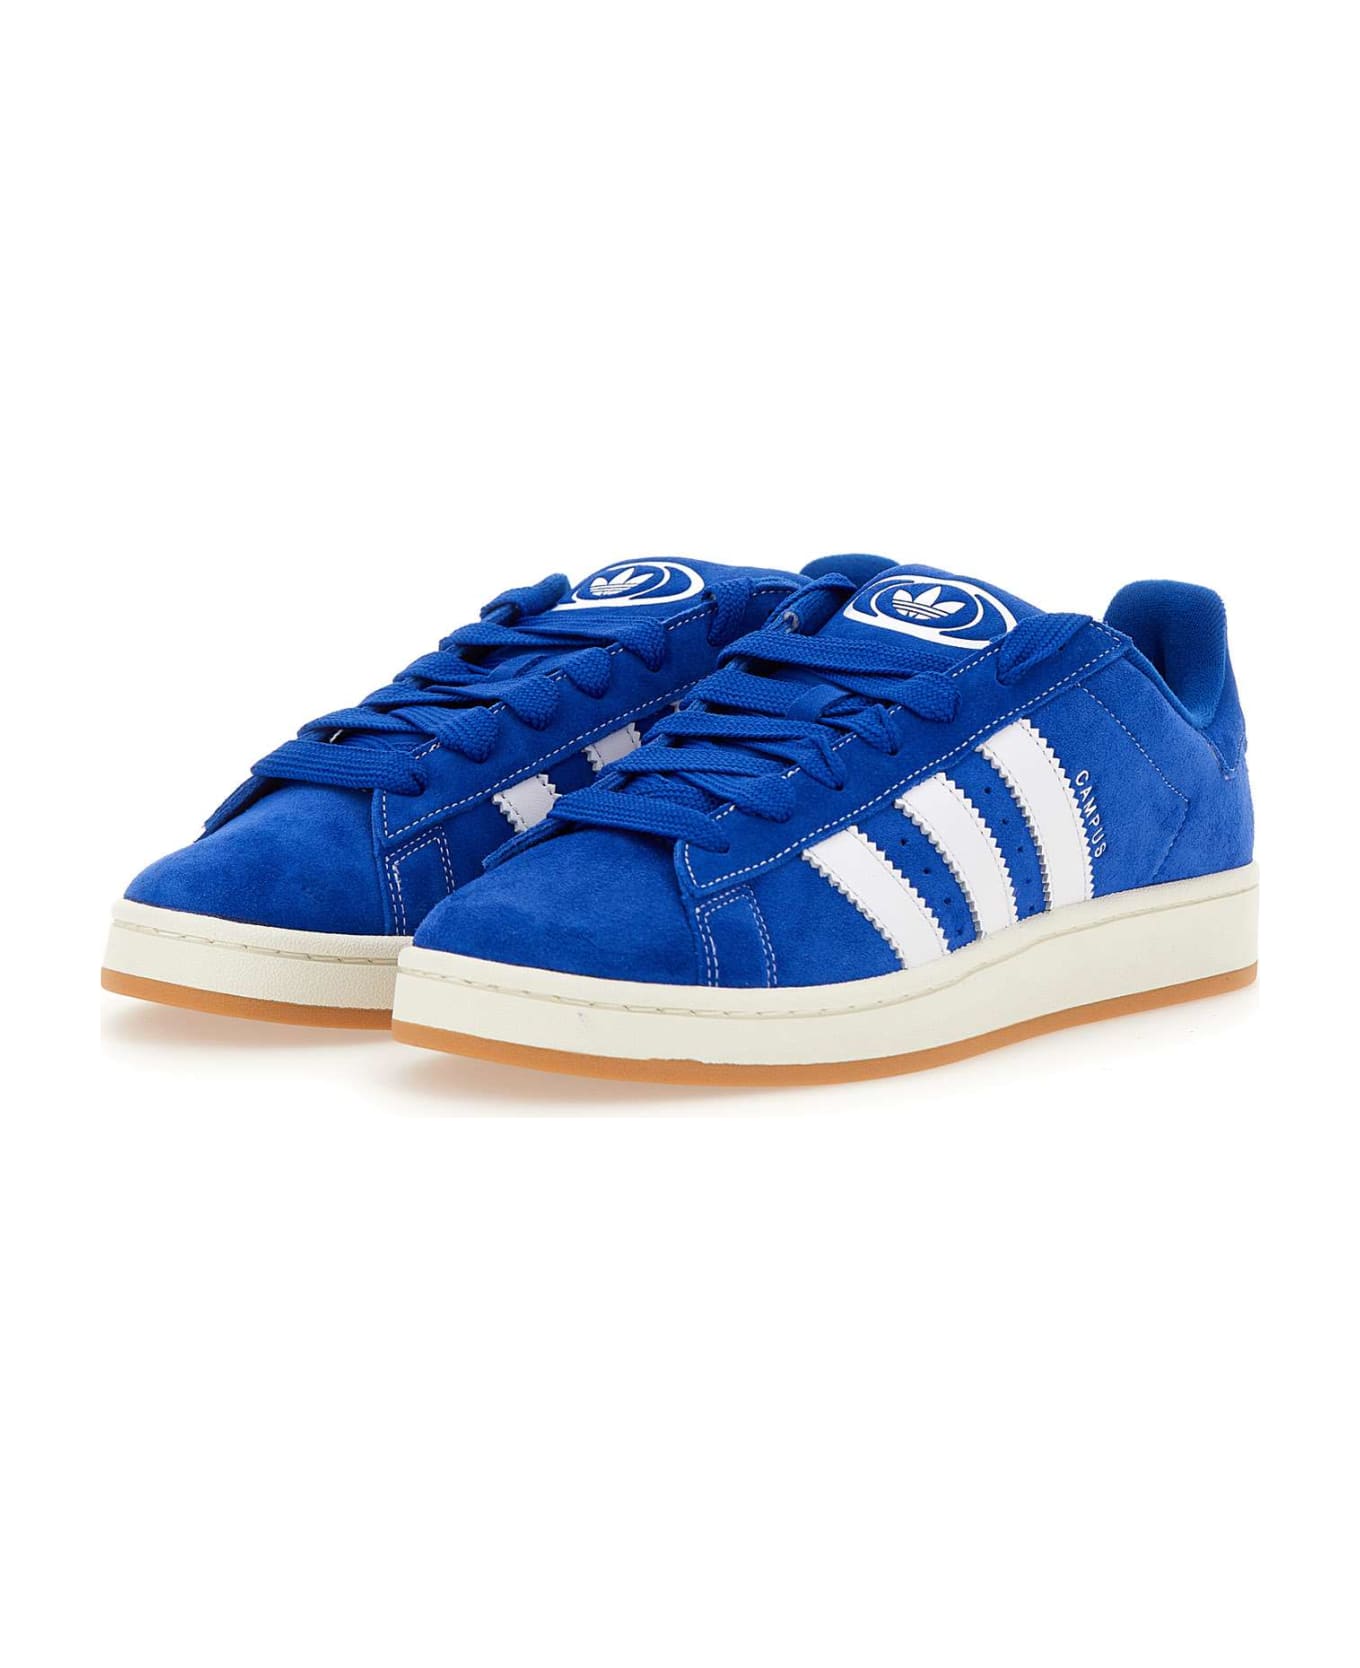 Adidas "campus 00s" Sneakers - BLUE スニーカー